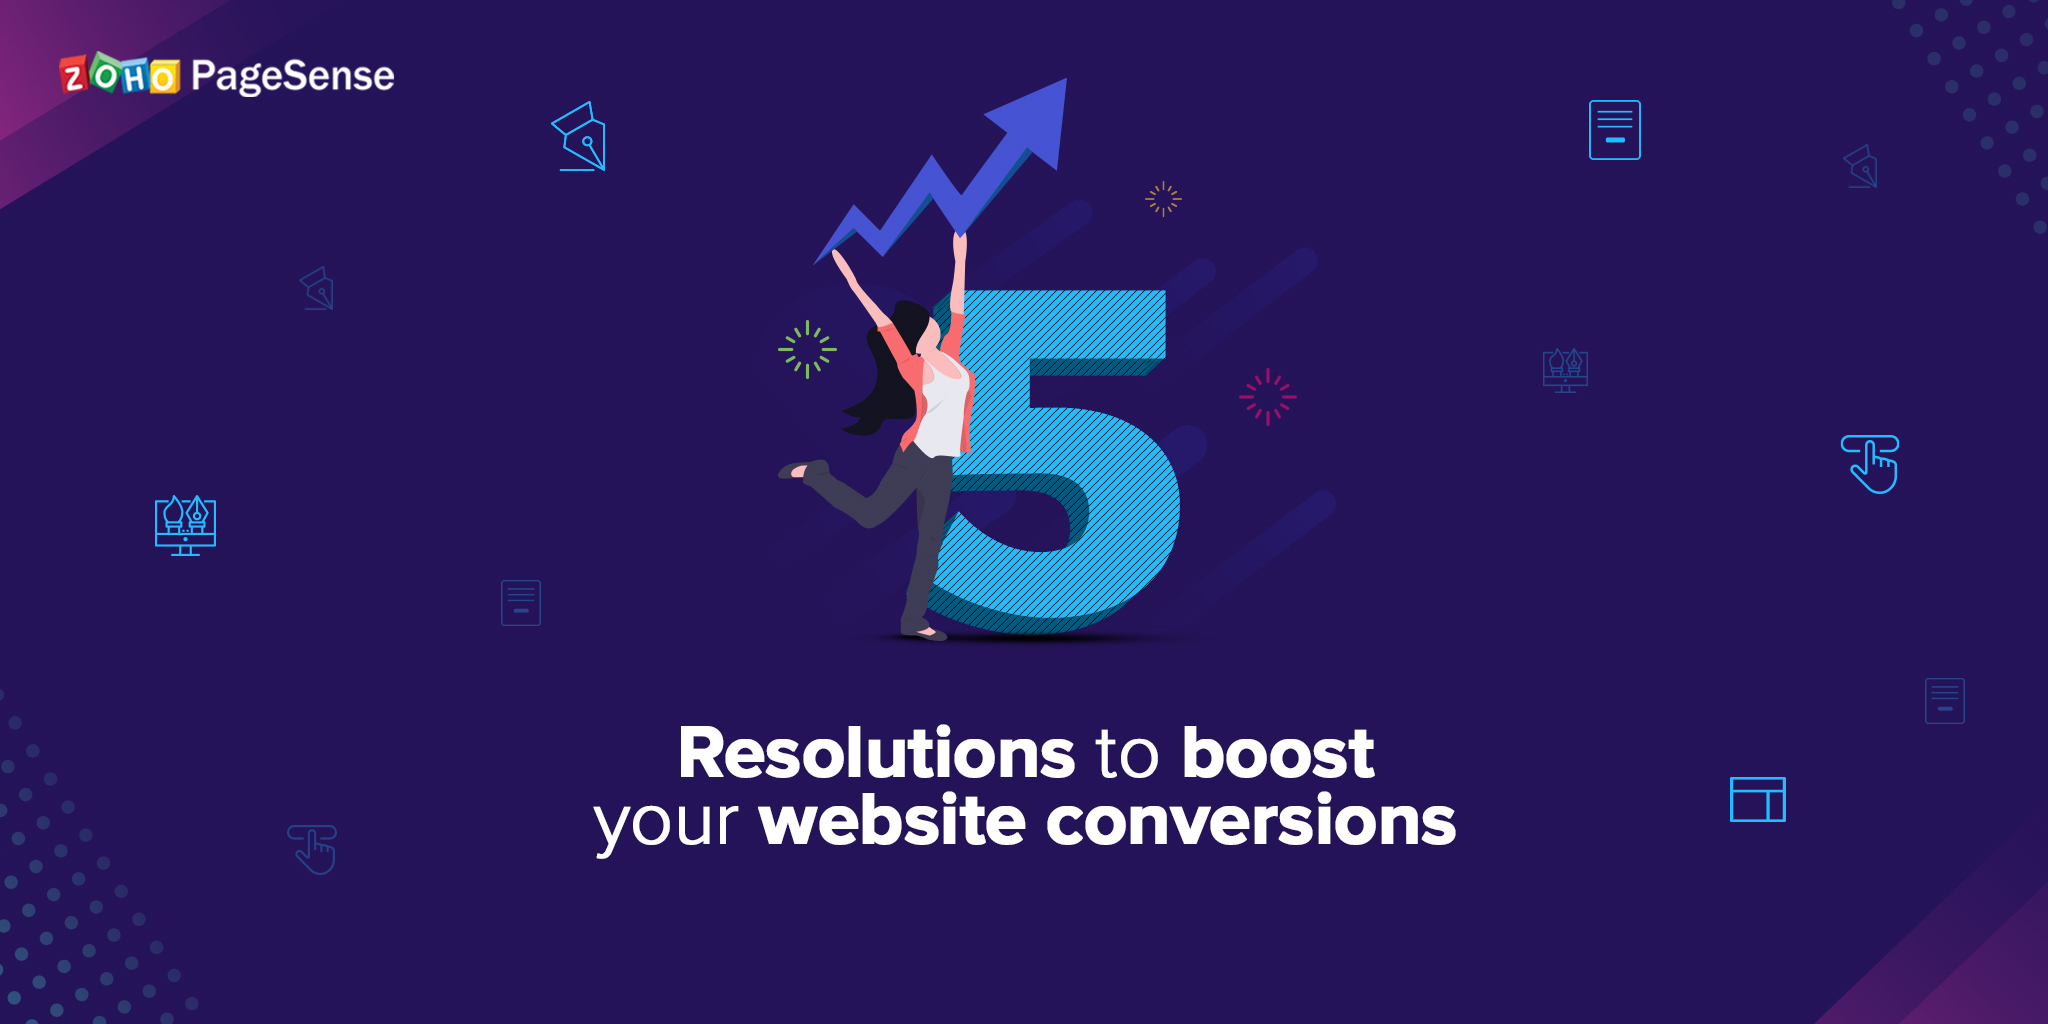 5 resolutions to boost your website conversions